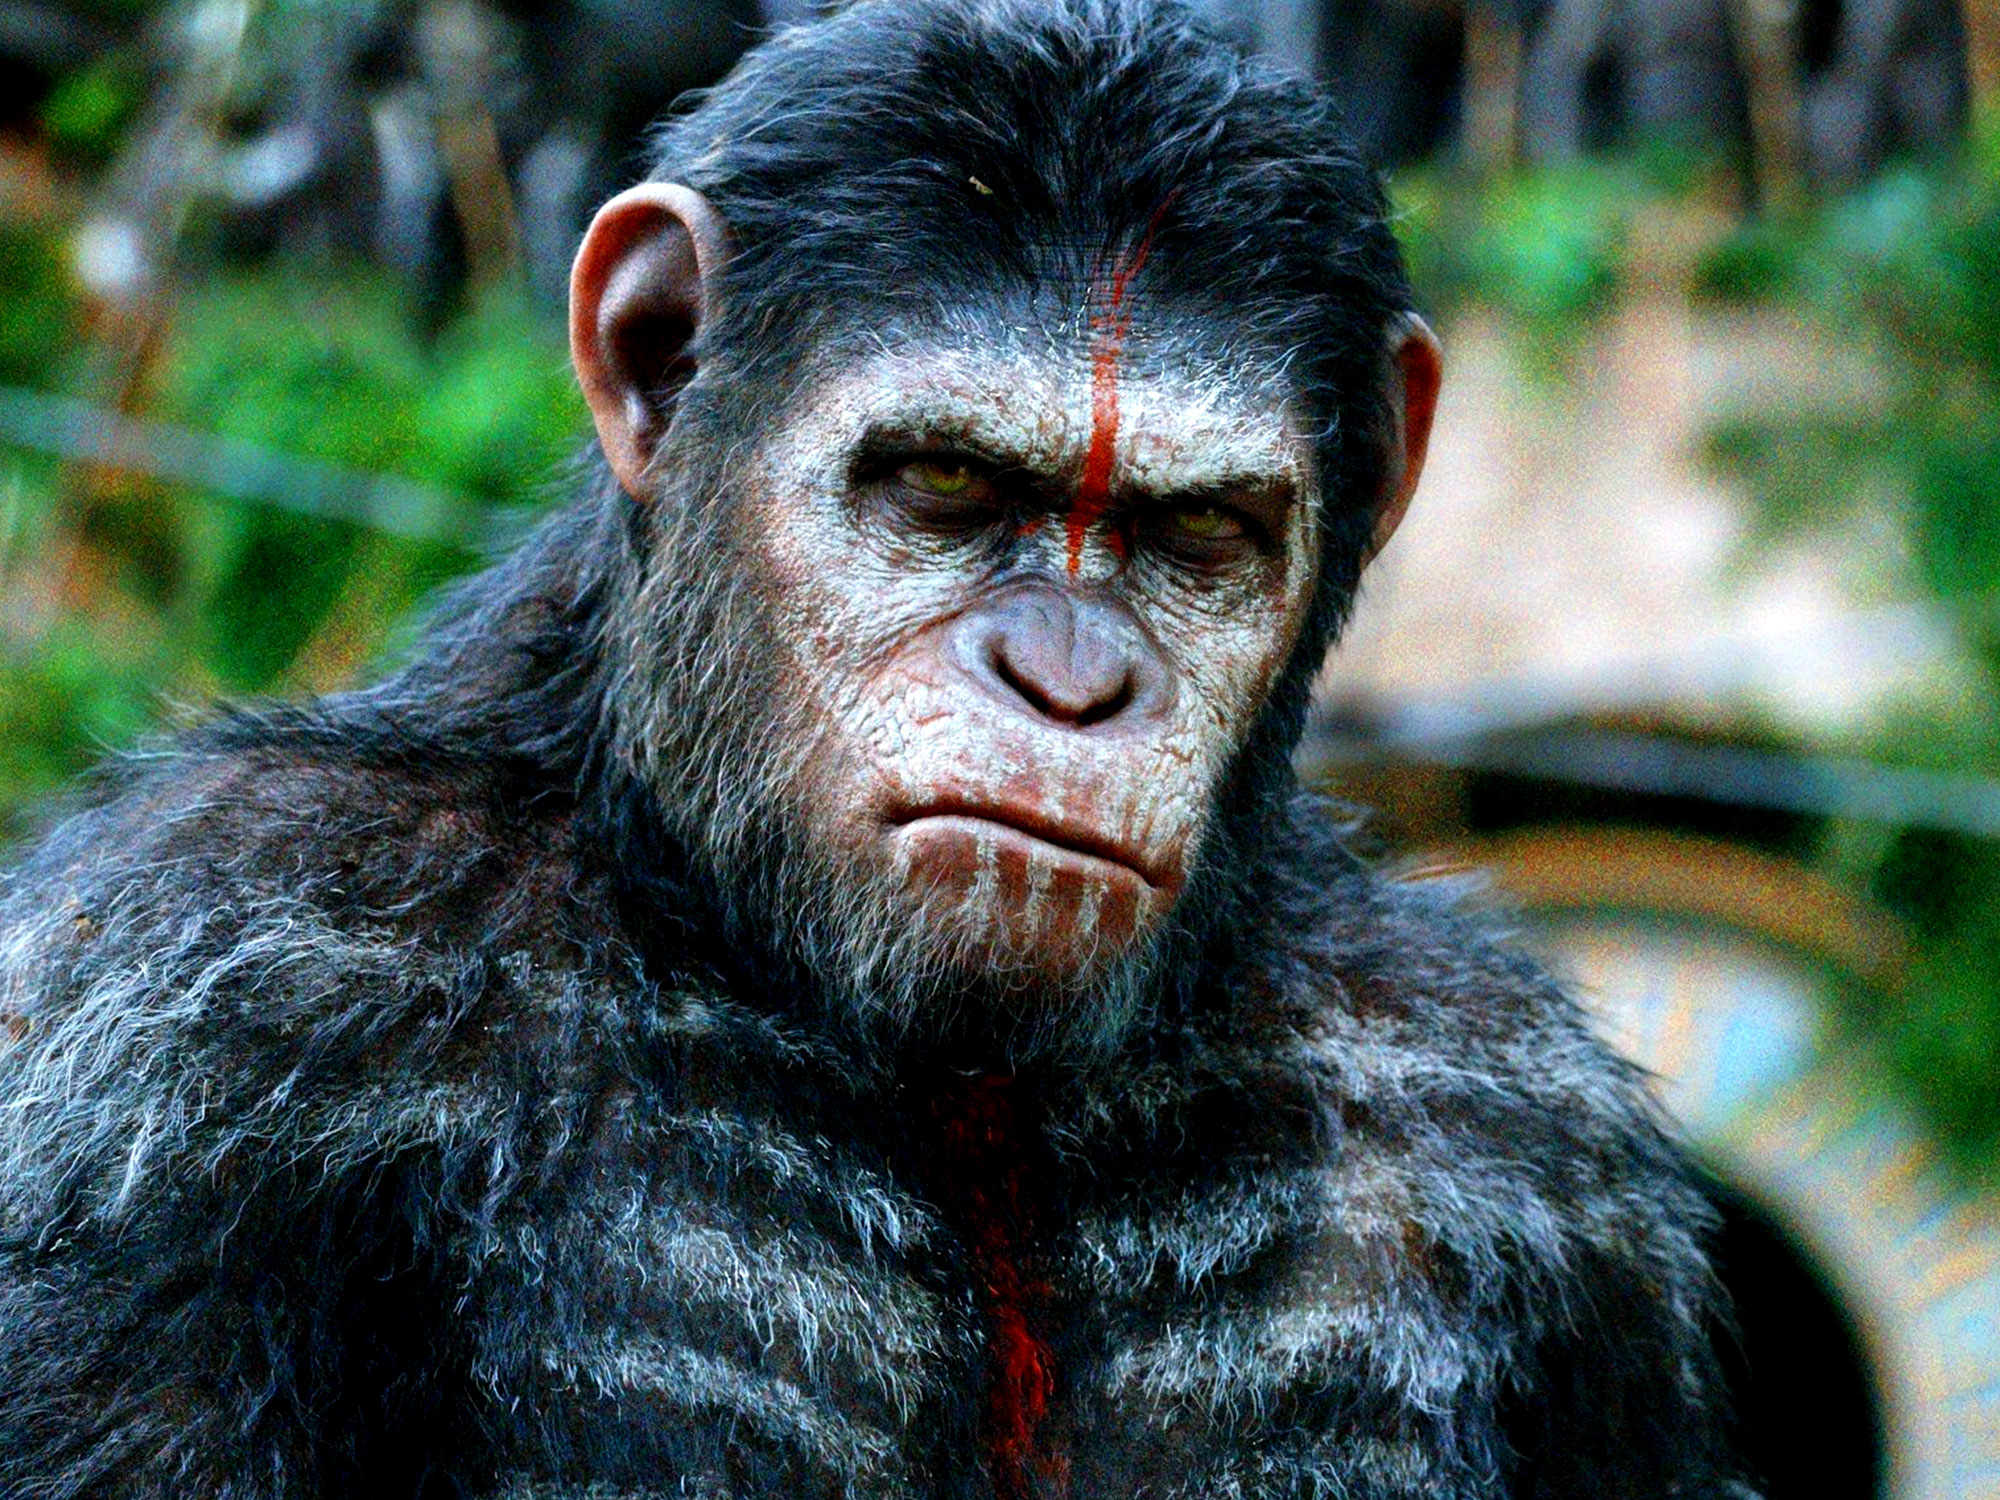 Dawn of the Planet of the Apes review2000 x 1500